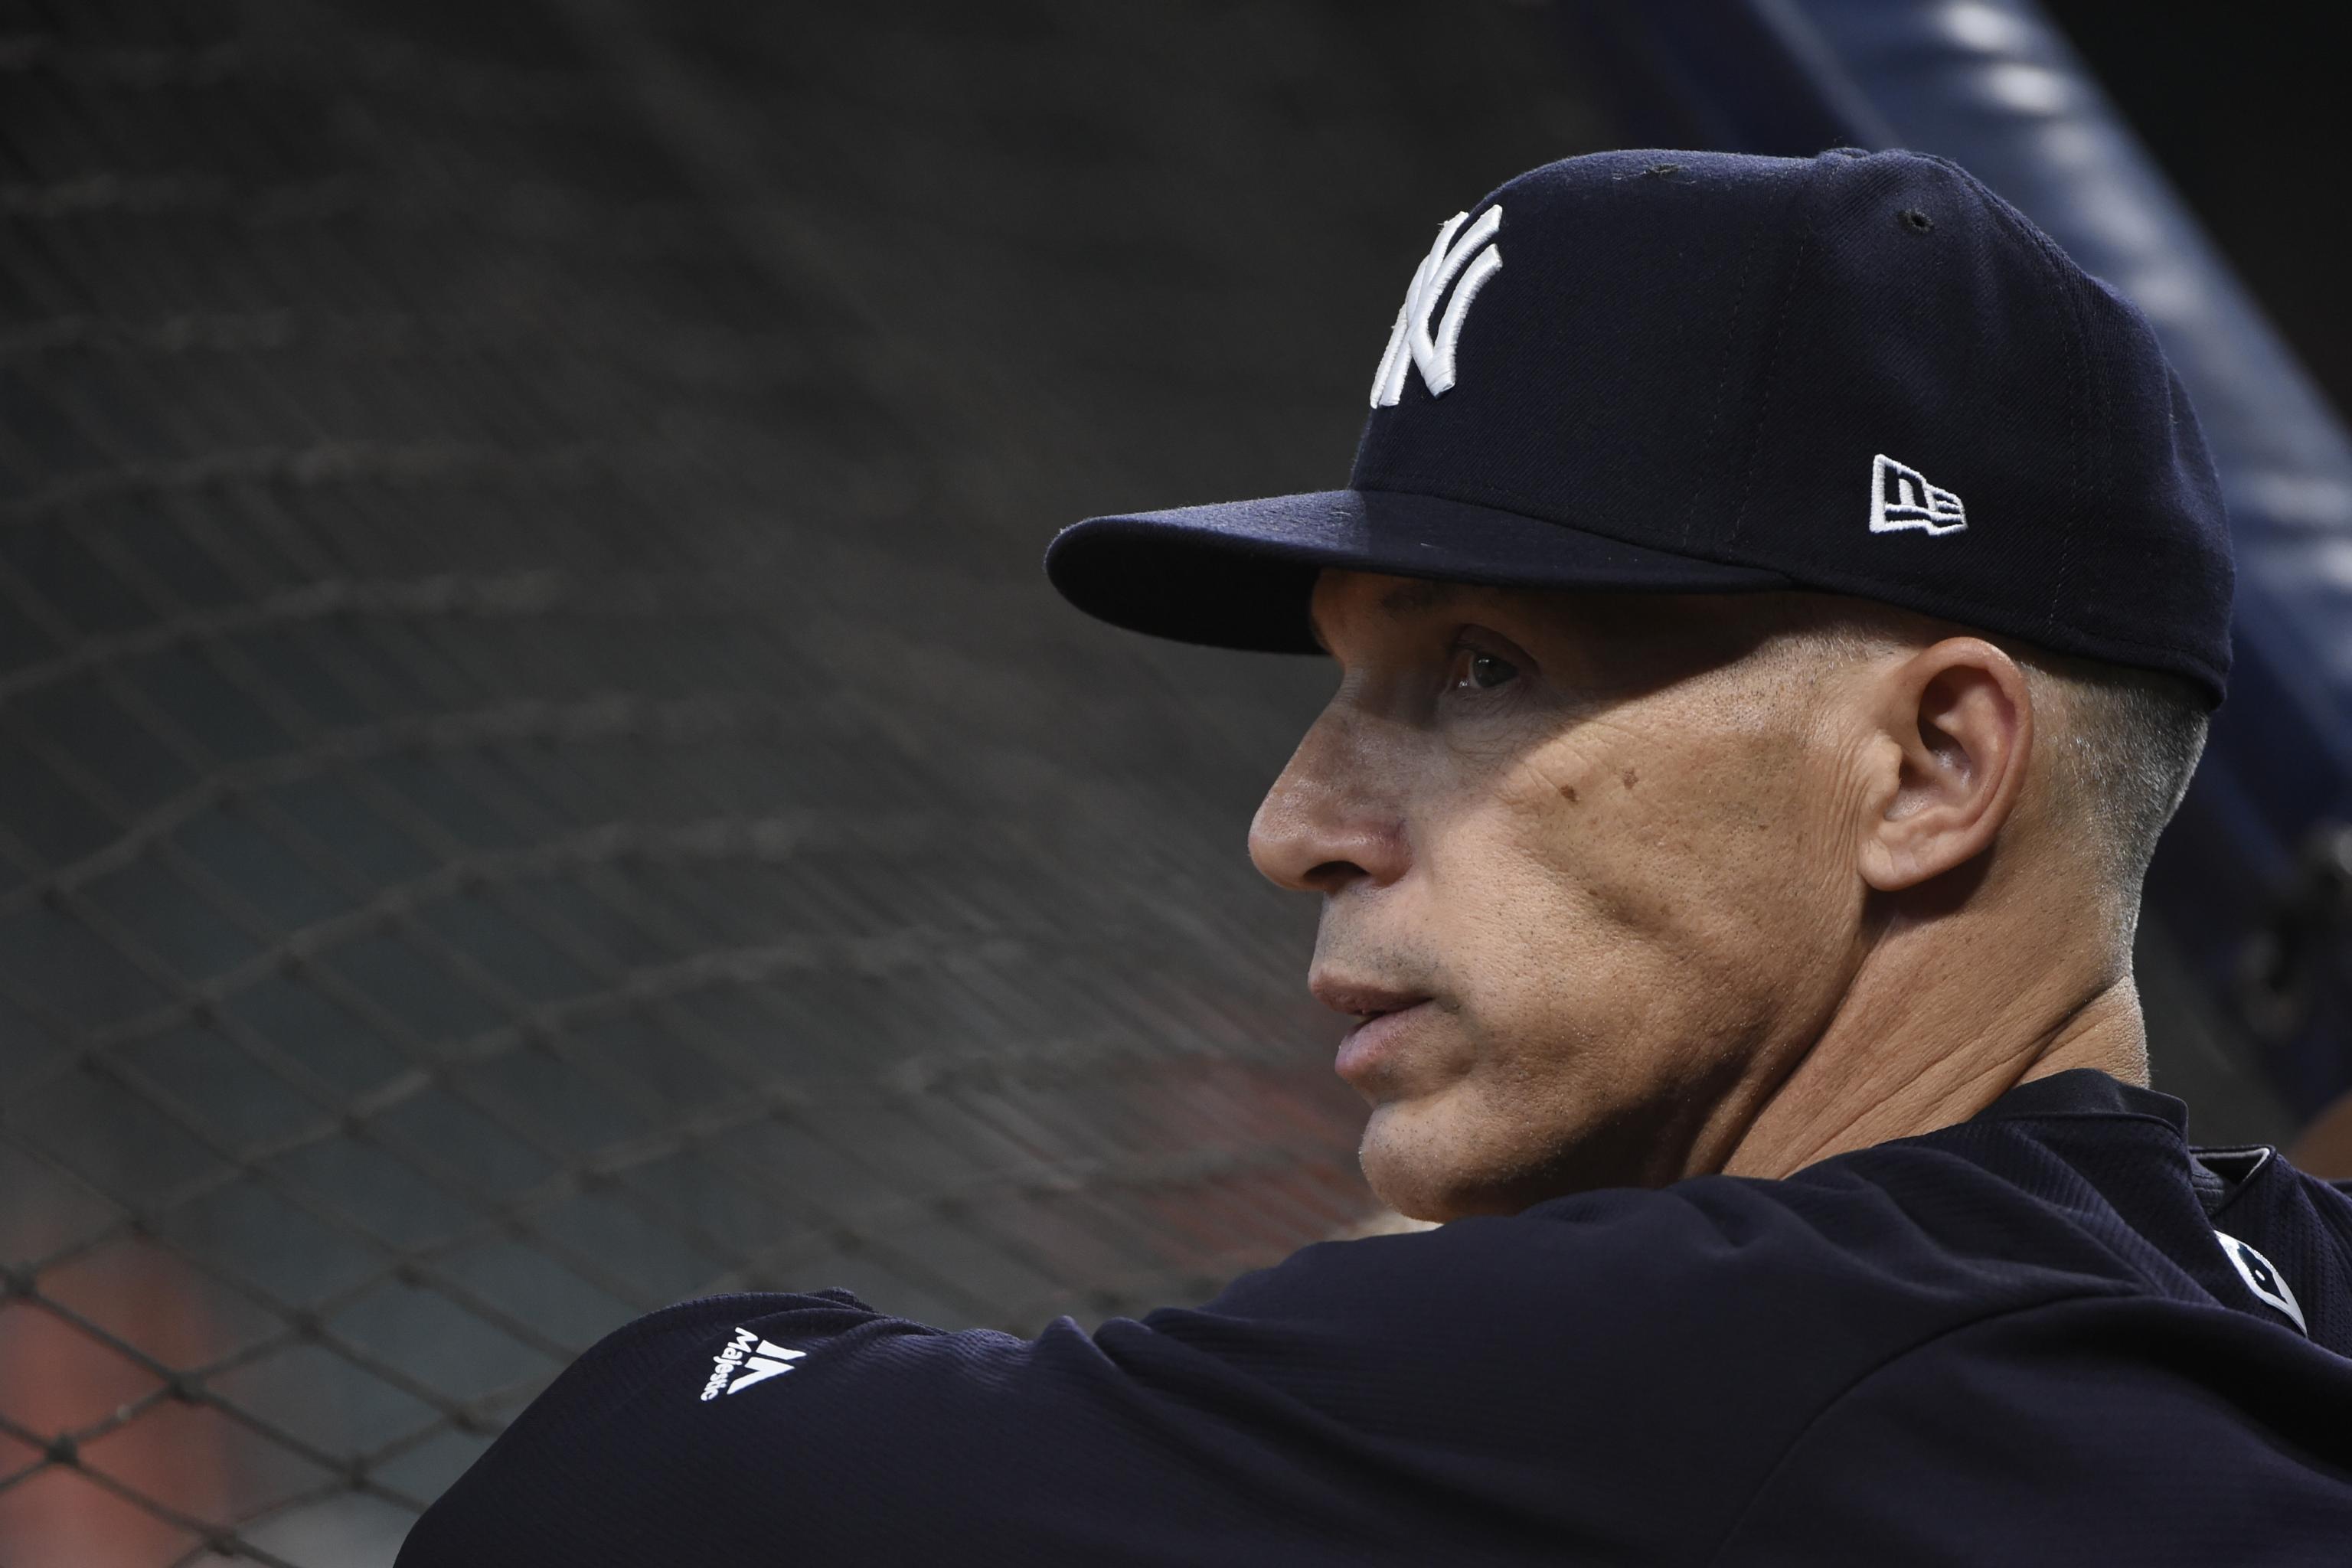 Hopefully there comes a day that I manage again': How Joe Girardi's summer  of fun was spent coaching youth baseball and sharing wisdom - The Athletic